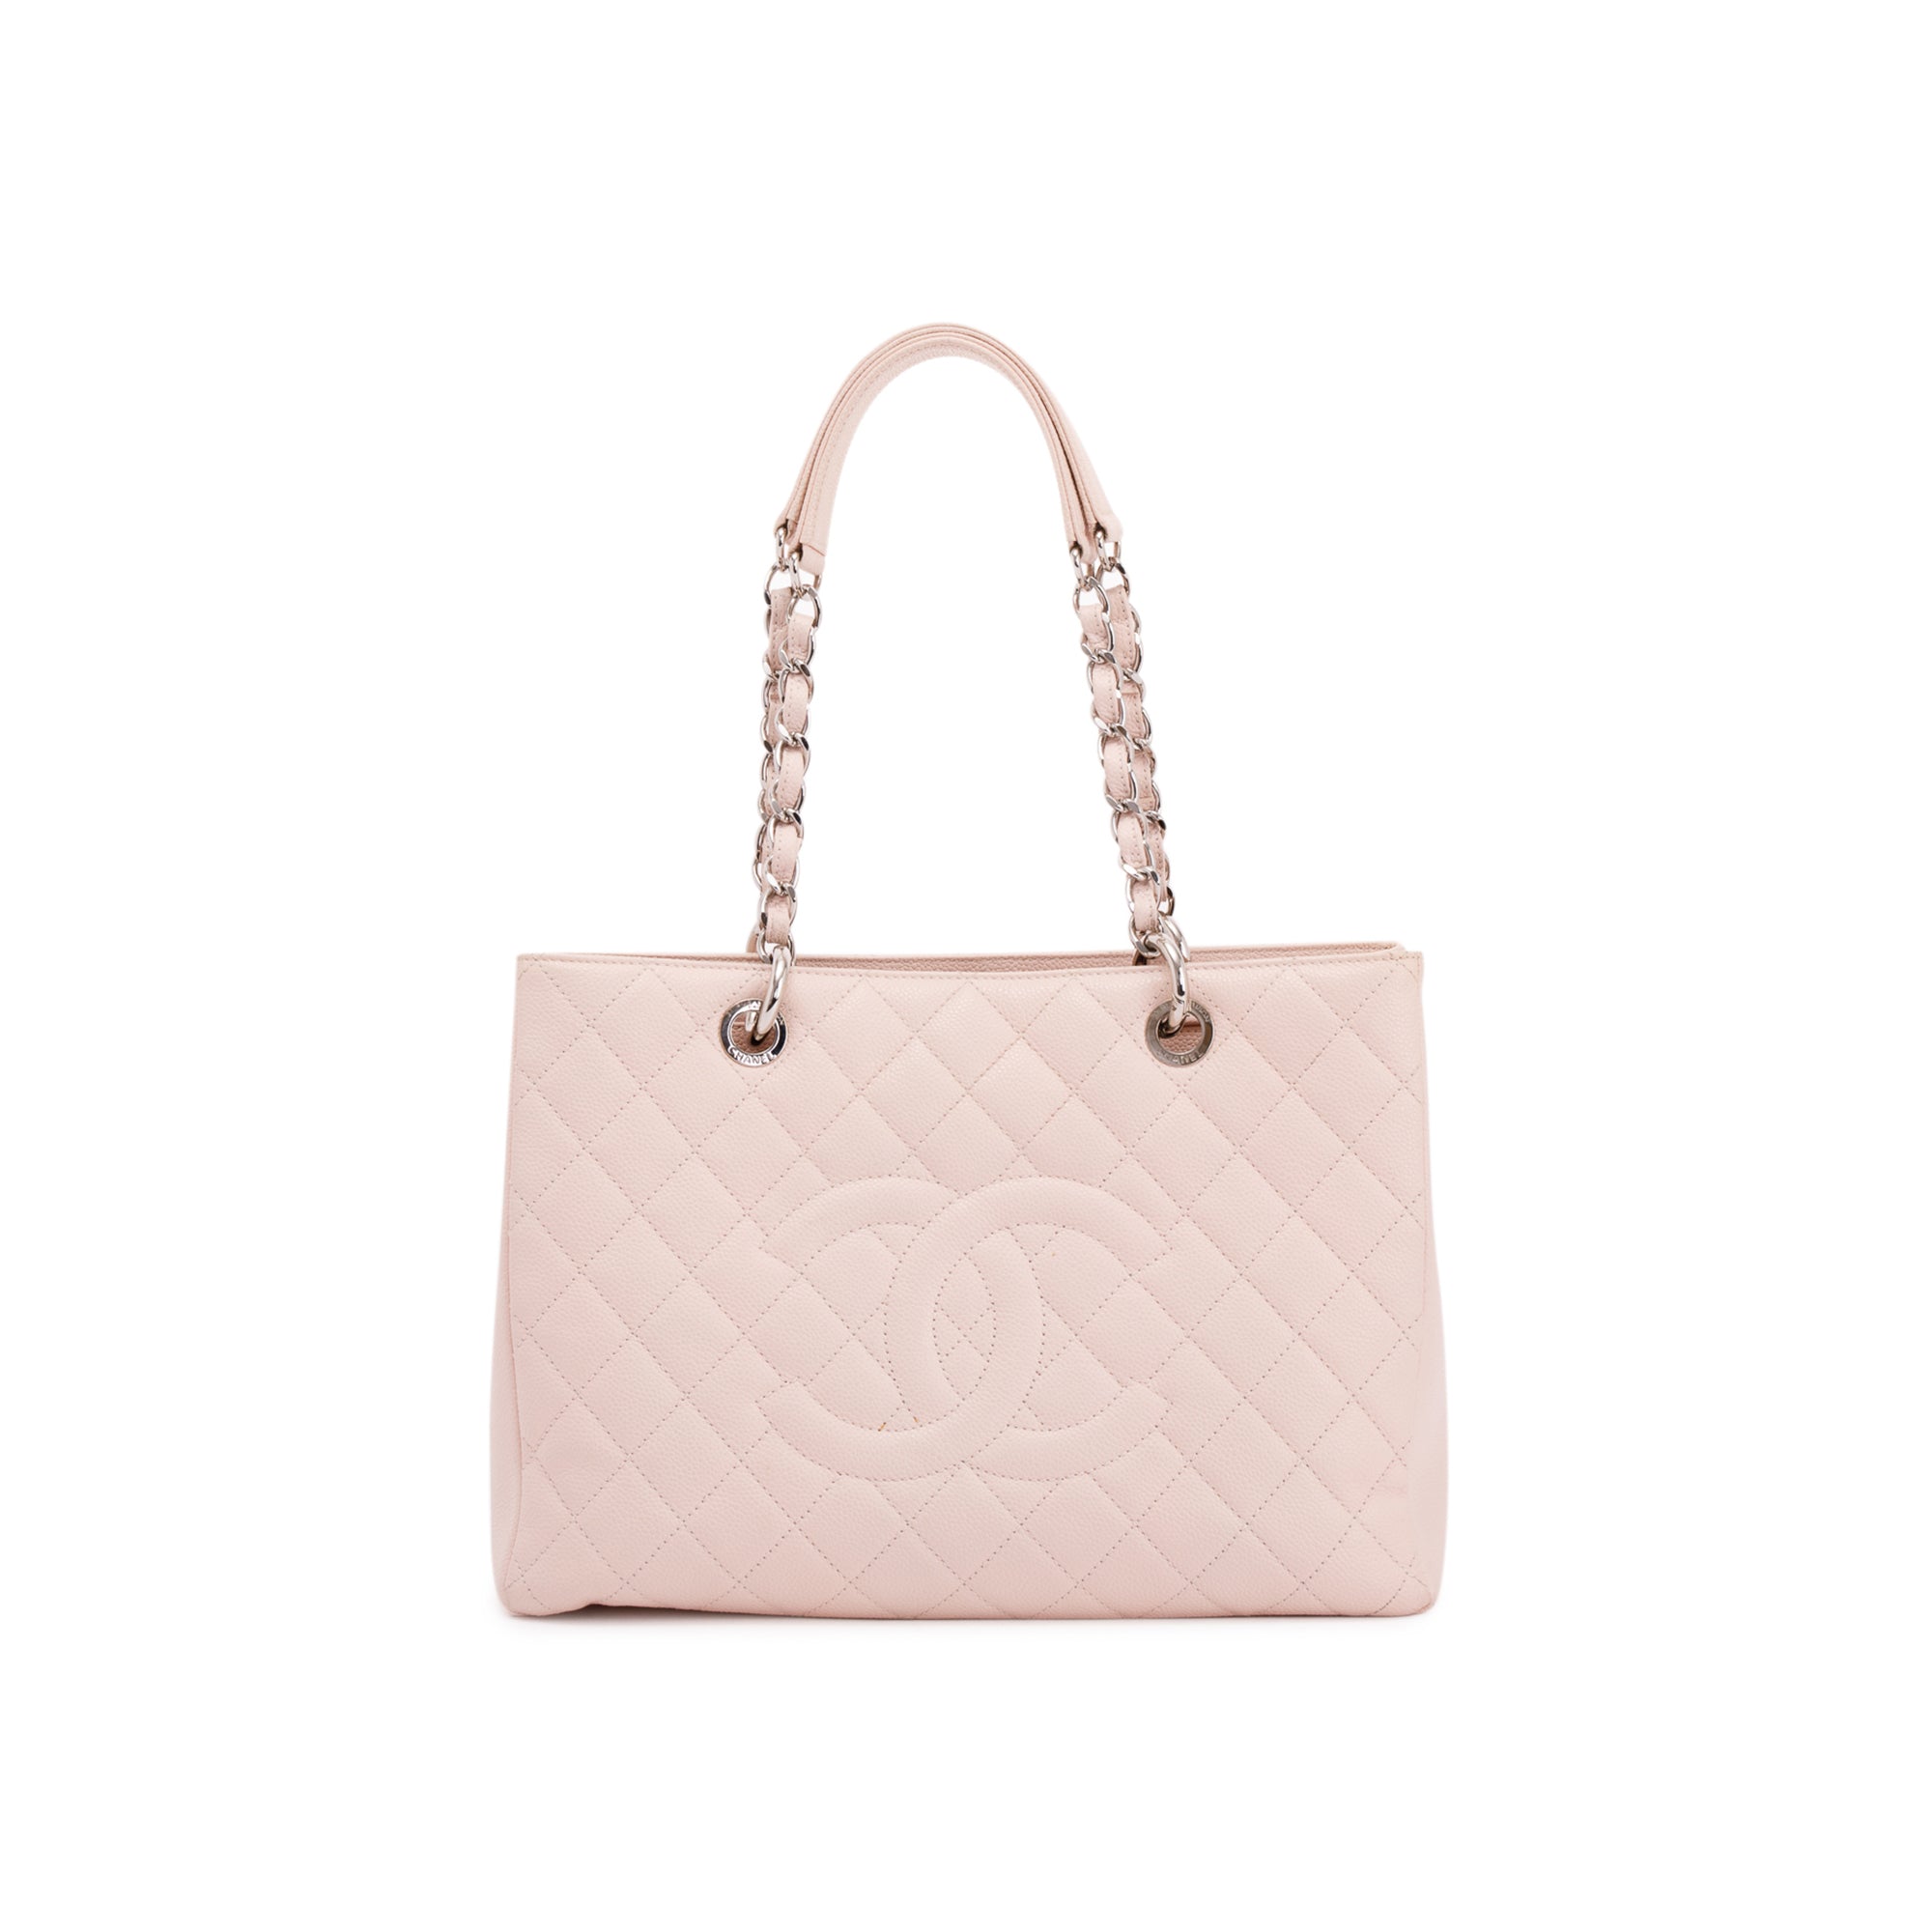 CHANEL GST Leather Exterior Tote Bags & Handbags for Women